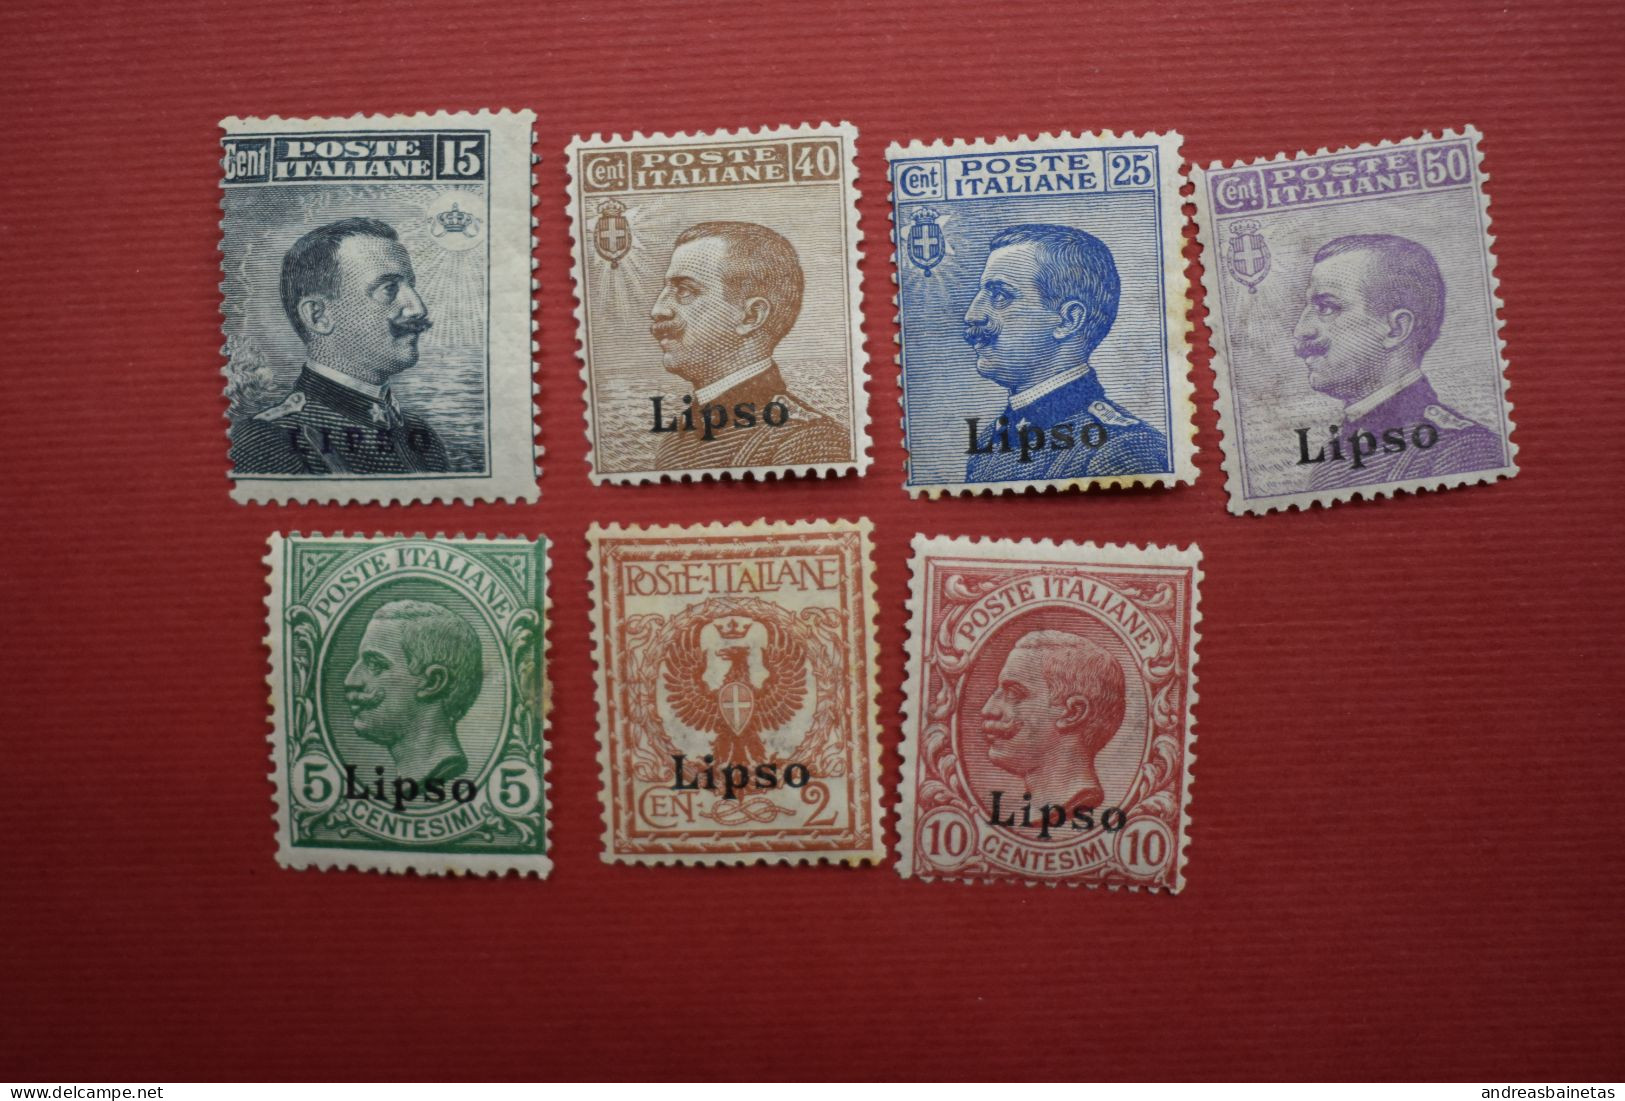 Stamps Greece ITALIAN OCCUPATION - ITALIAN POST 1912 "LIPSO" Ovpt, Complete Set Of 7 Values, M. (Hellas 3VII/9VII). - Dodecaneso